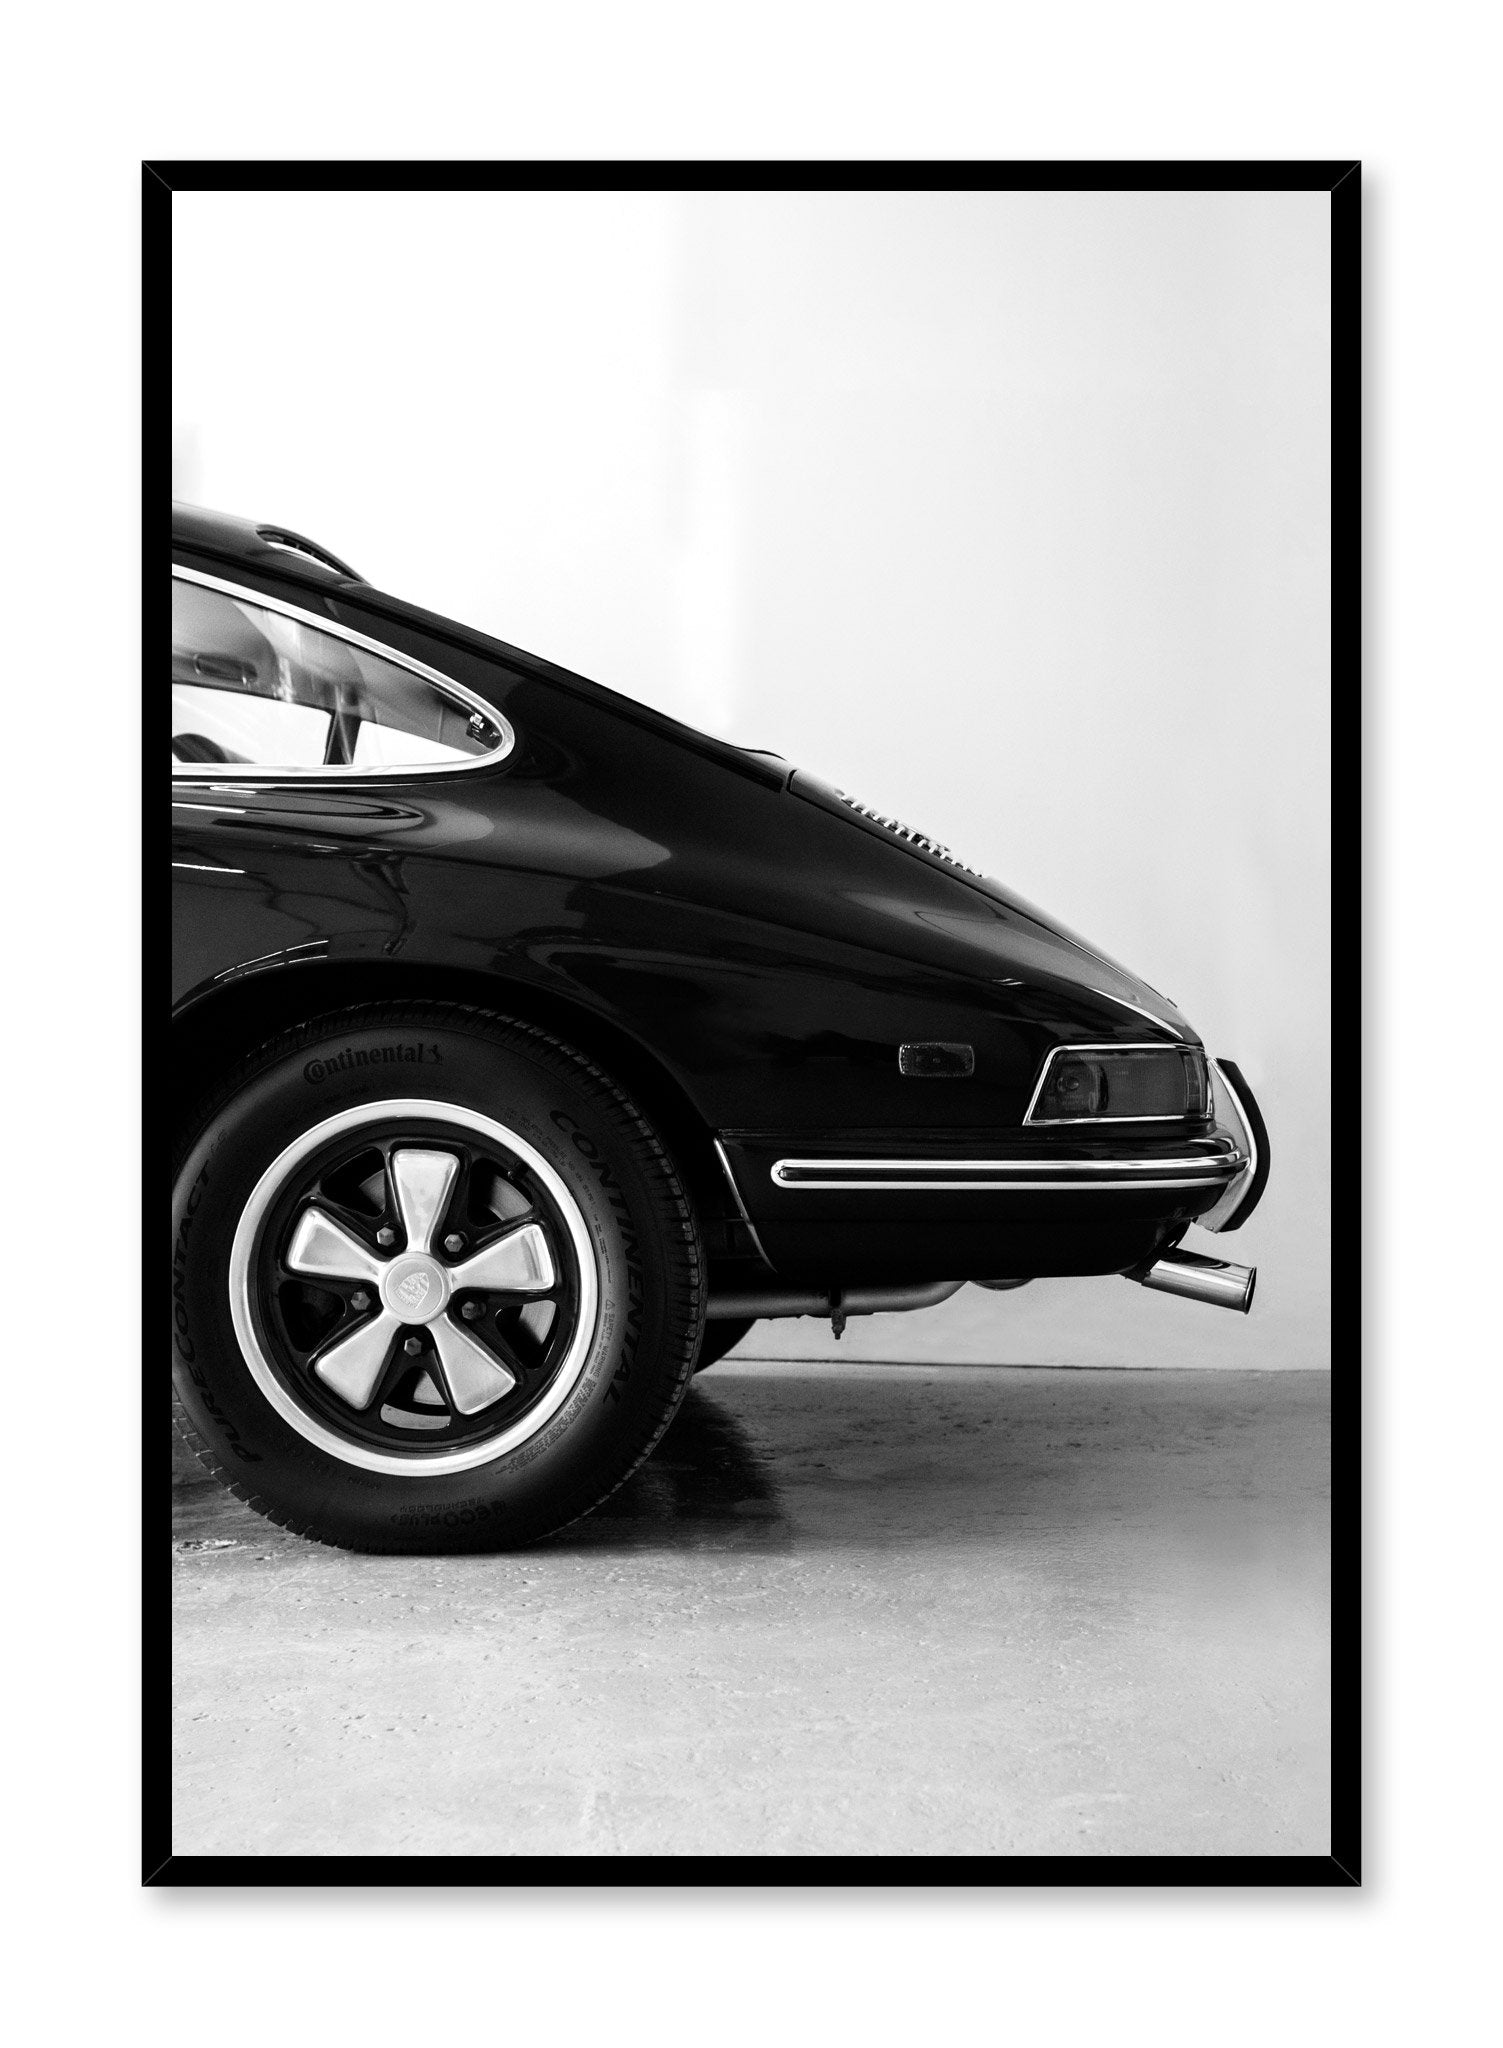 Modern minimalist poster by Opposite Wall with black and white photography of Porsche car